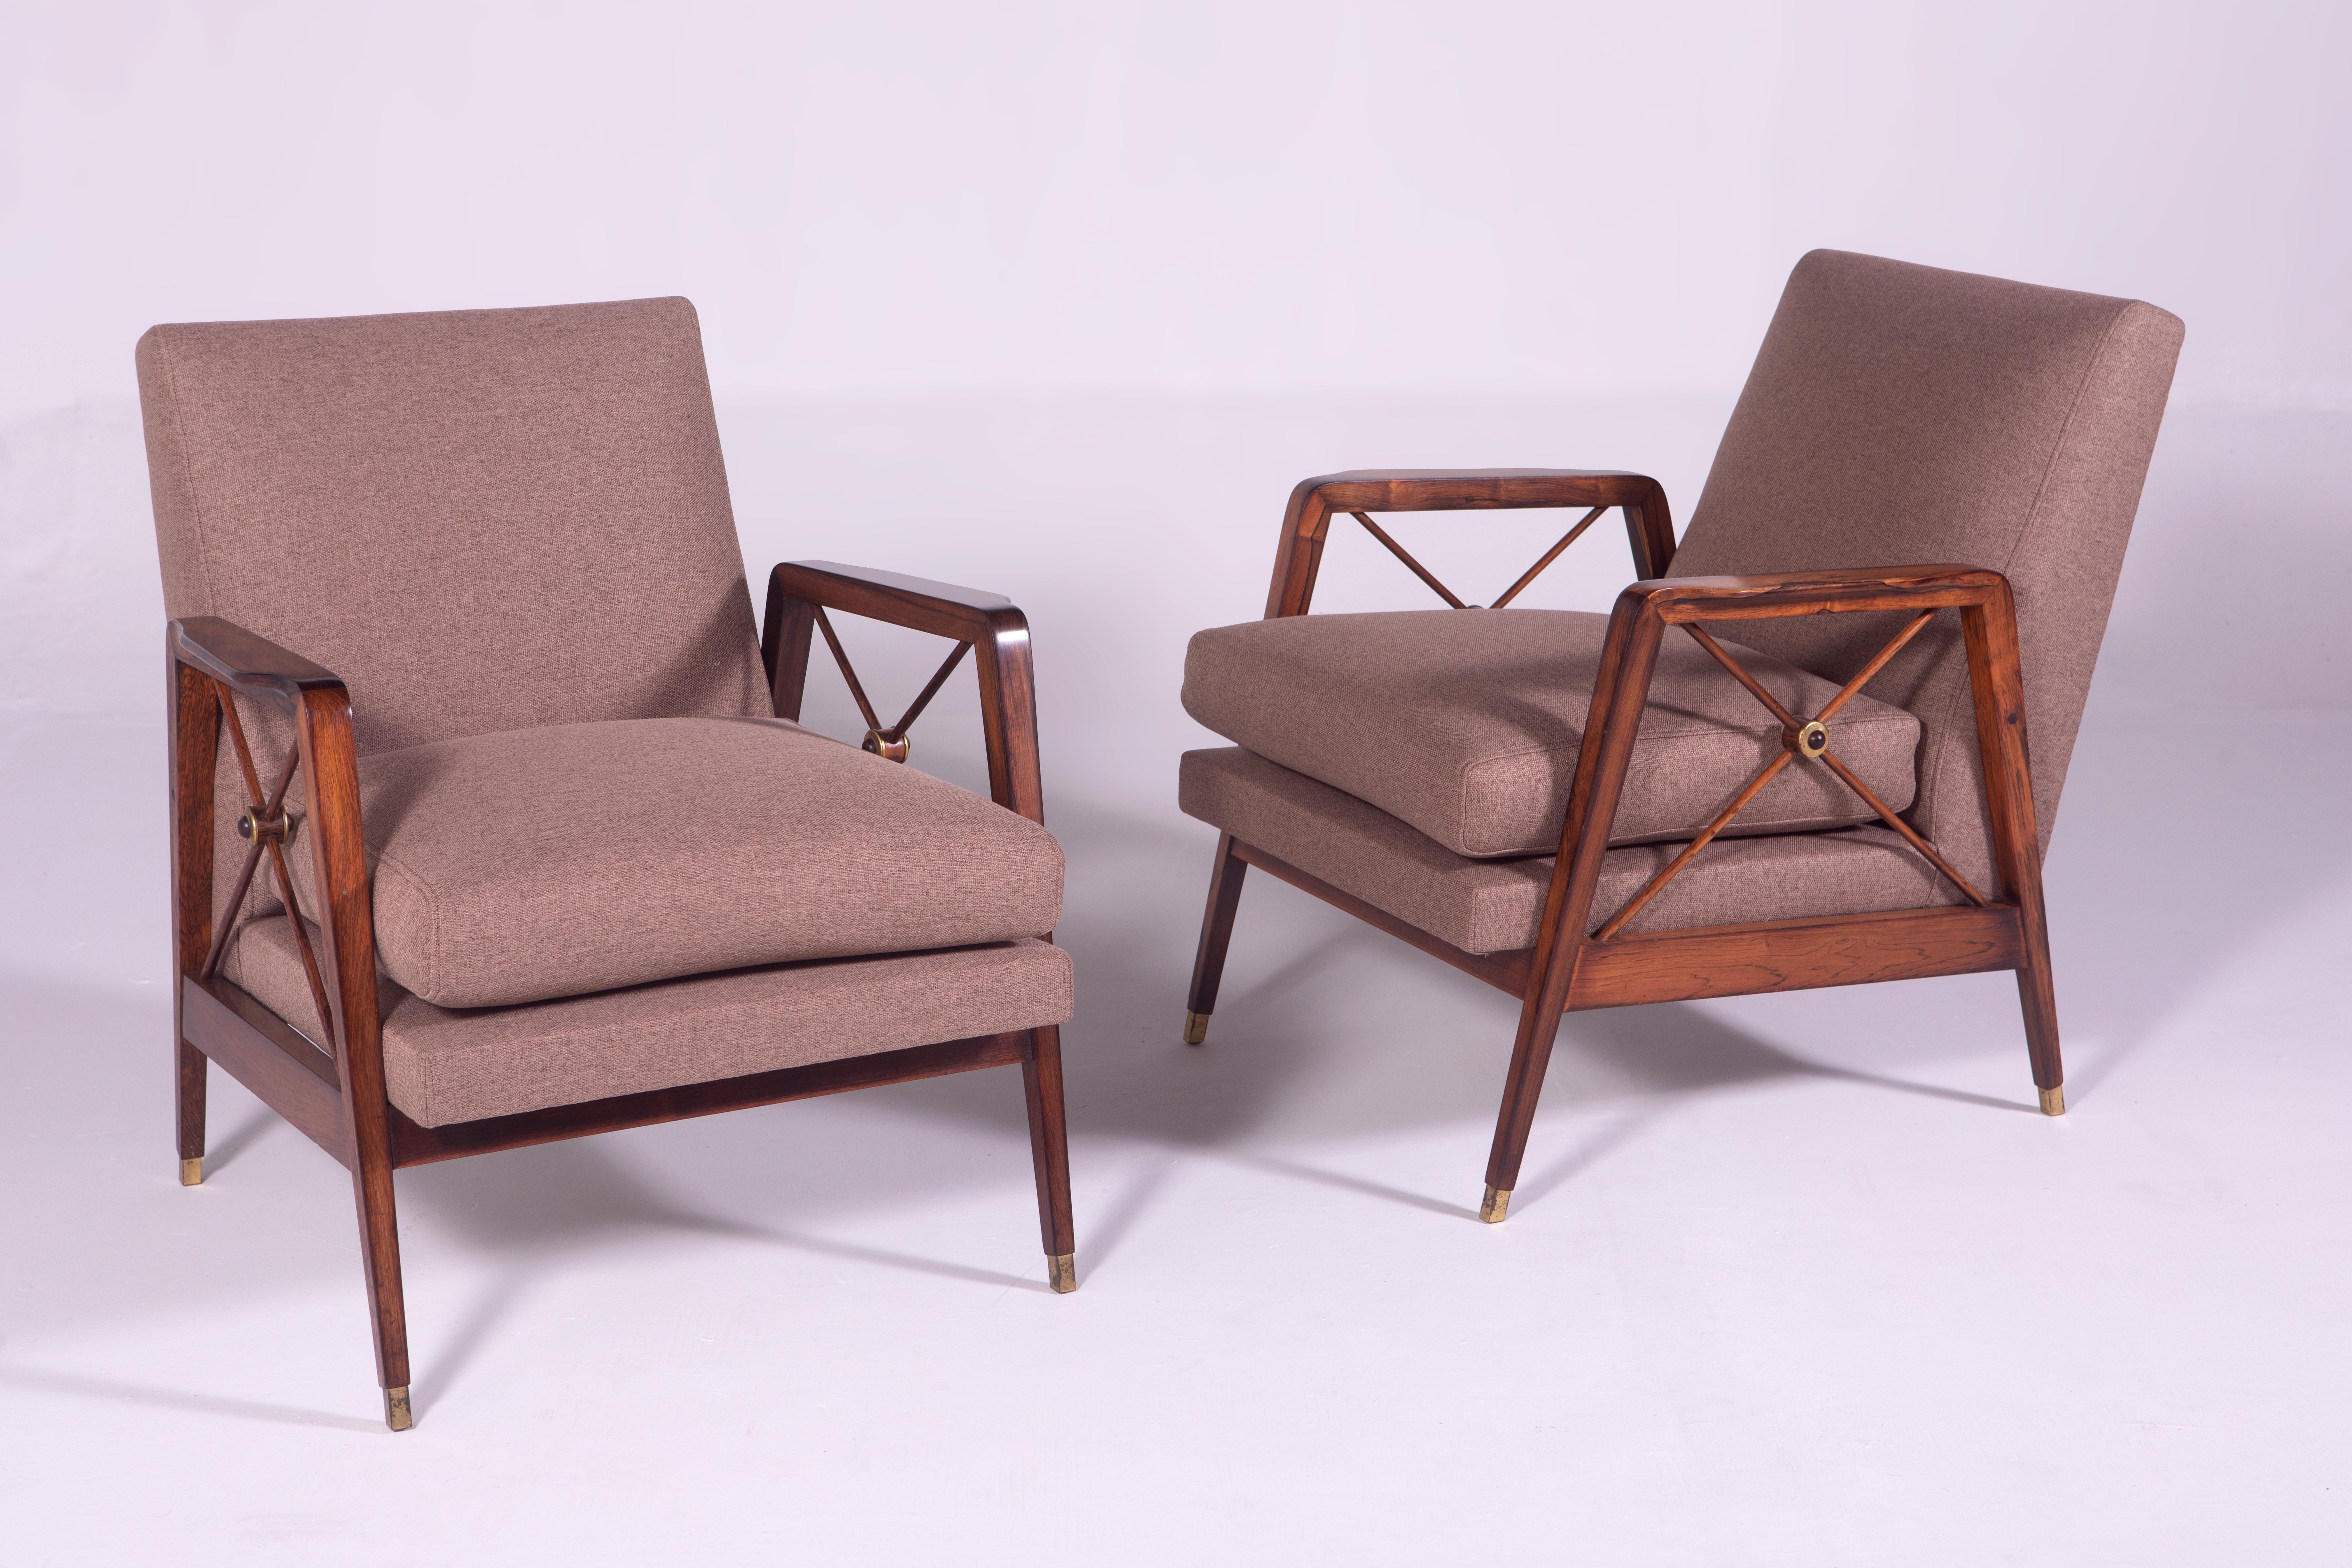 Mid-Century Modern Pair of Armchairs by Móveis Cavallaro, Brazil, 1960s

Pair of Mid-Century Modern Armchairs manufactured in Brazil in the 1960s by Móveis Cavallaro. 
Structured in wood and upholstered in fabric, it has the tip of the chair's feet